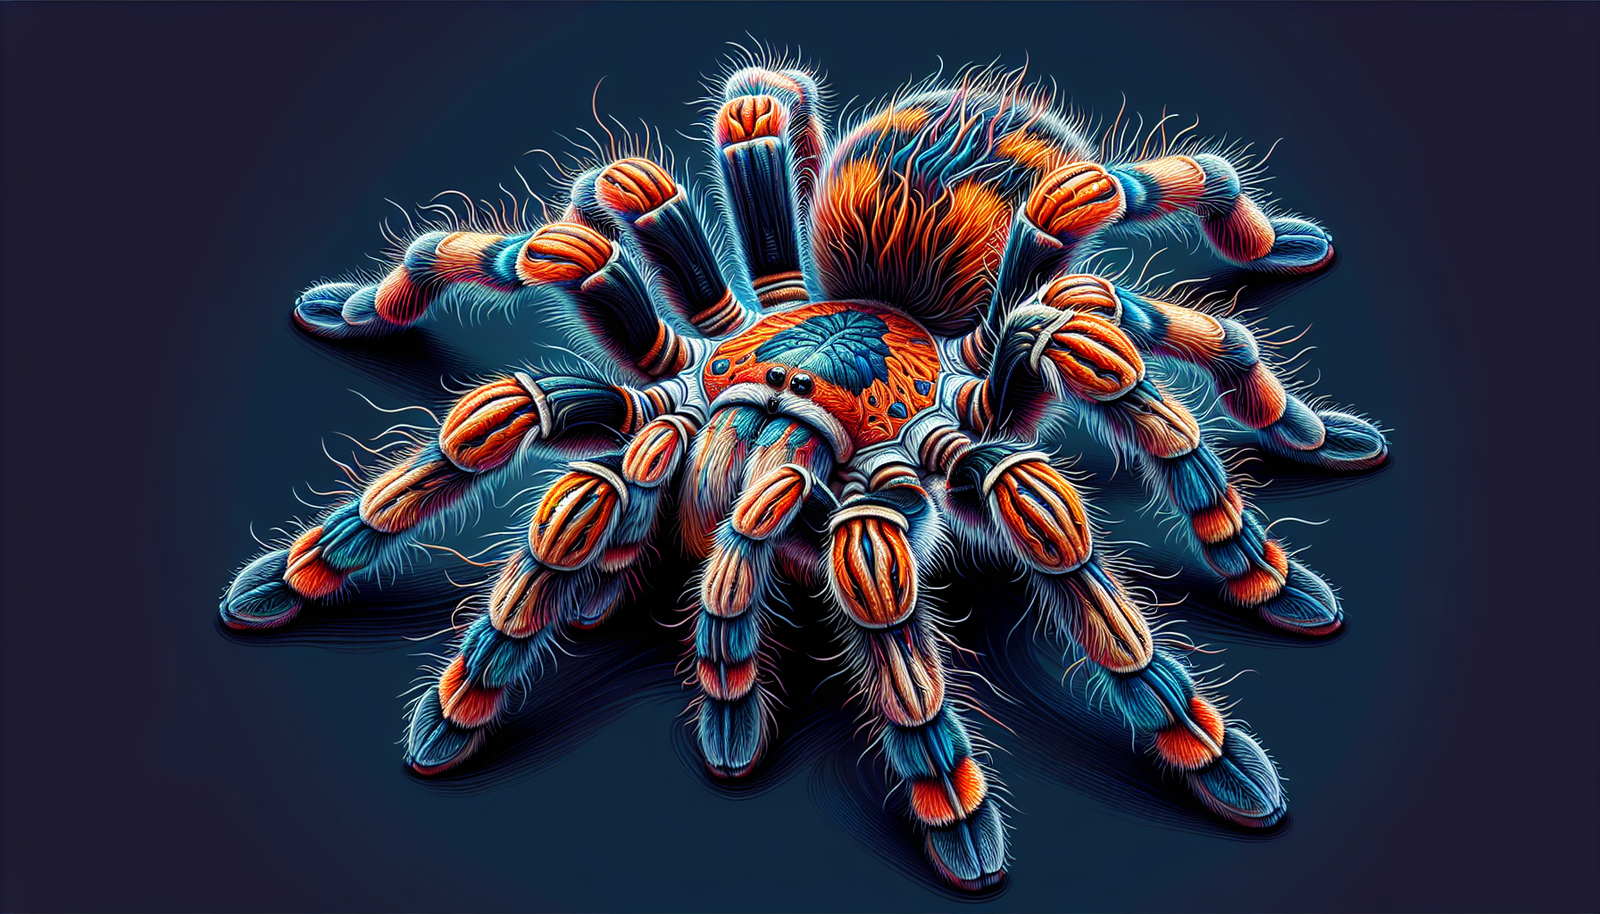 What Are The Behavioral Traits Of The Impressive Mexican Flame Knee Tarantula?